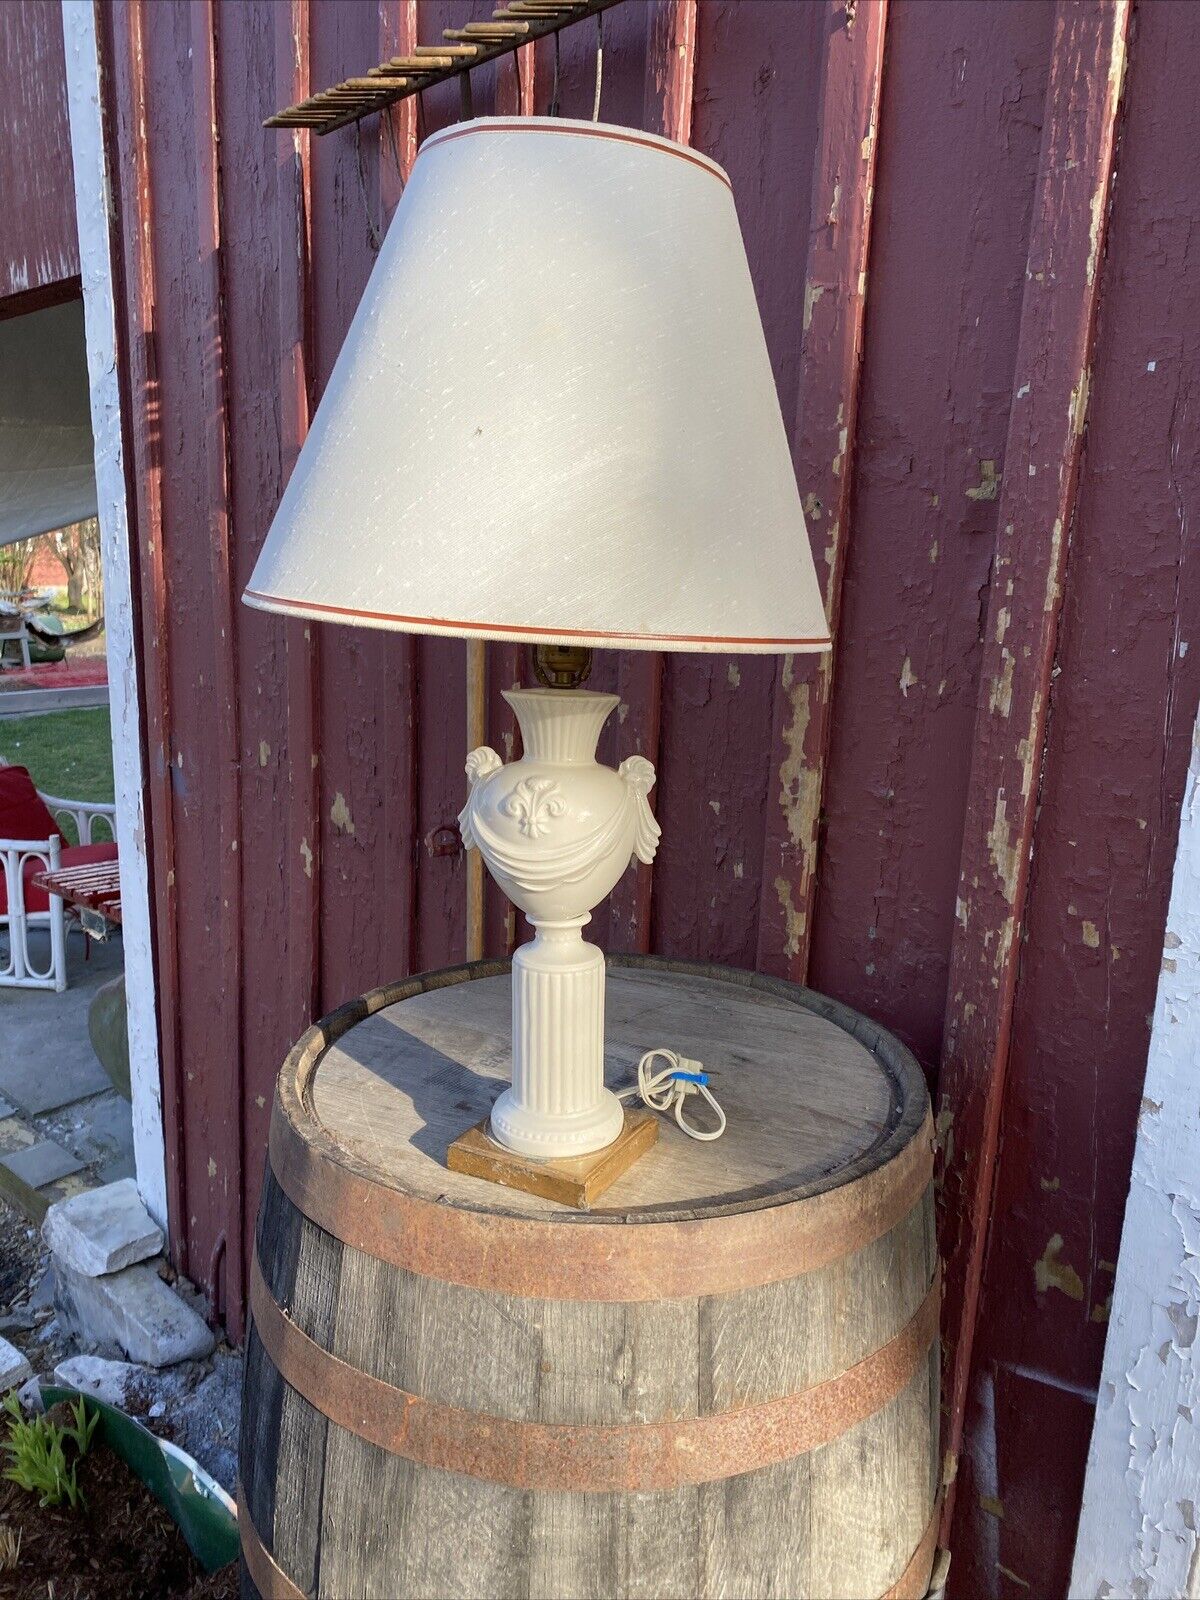 Vintage White Porcelain Urn Italian French Country Style Table Lamp On Pedestal